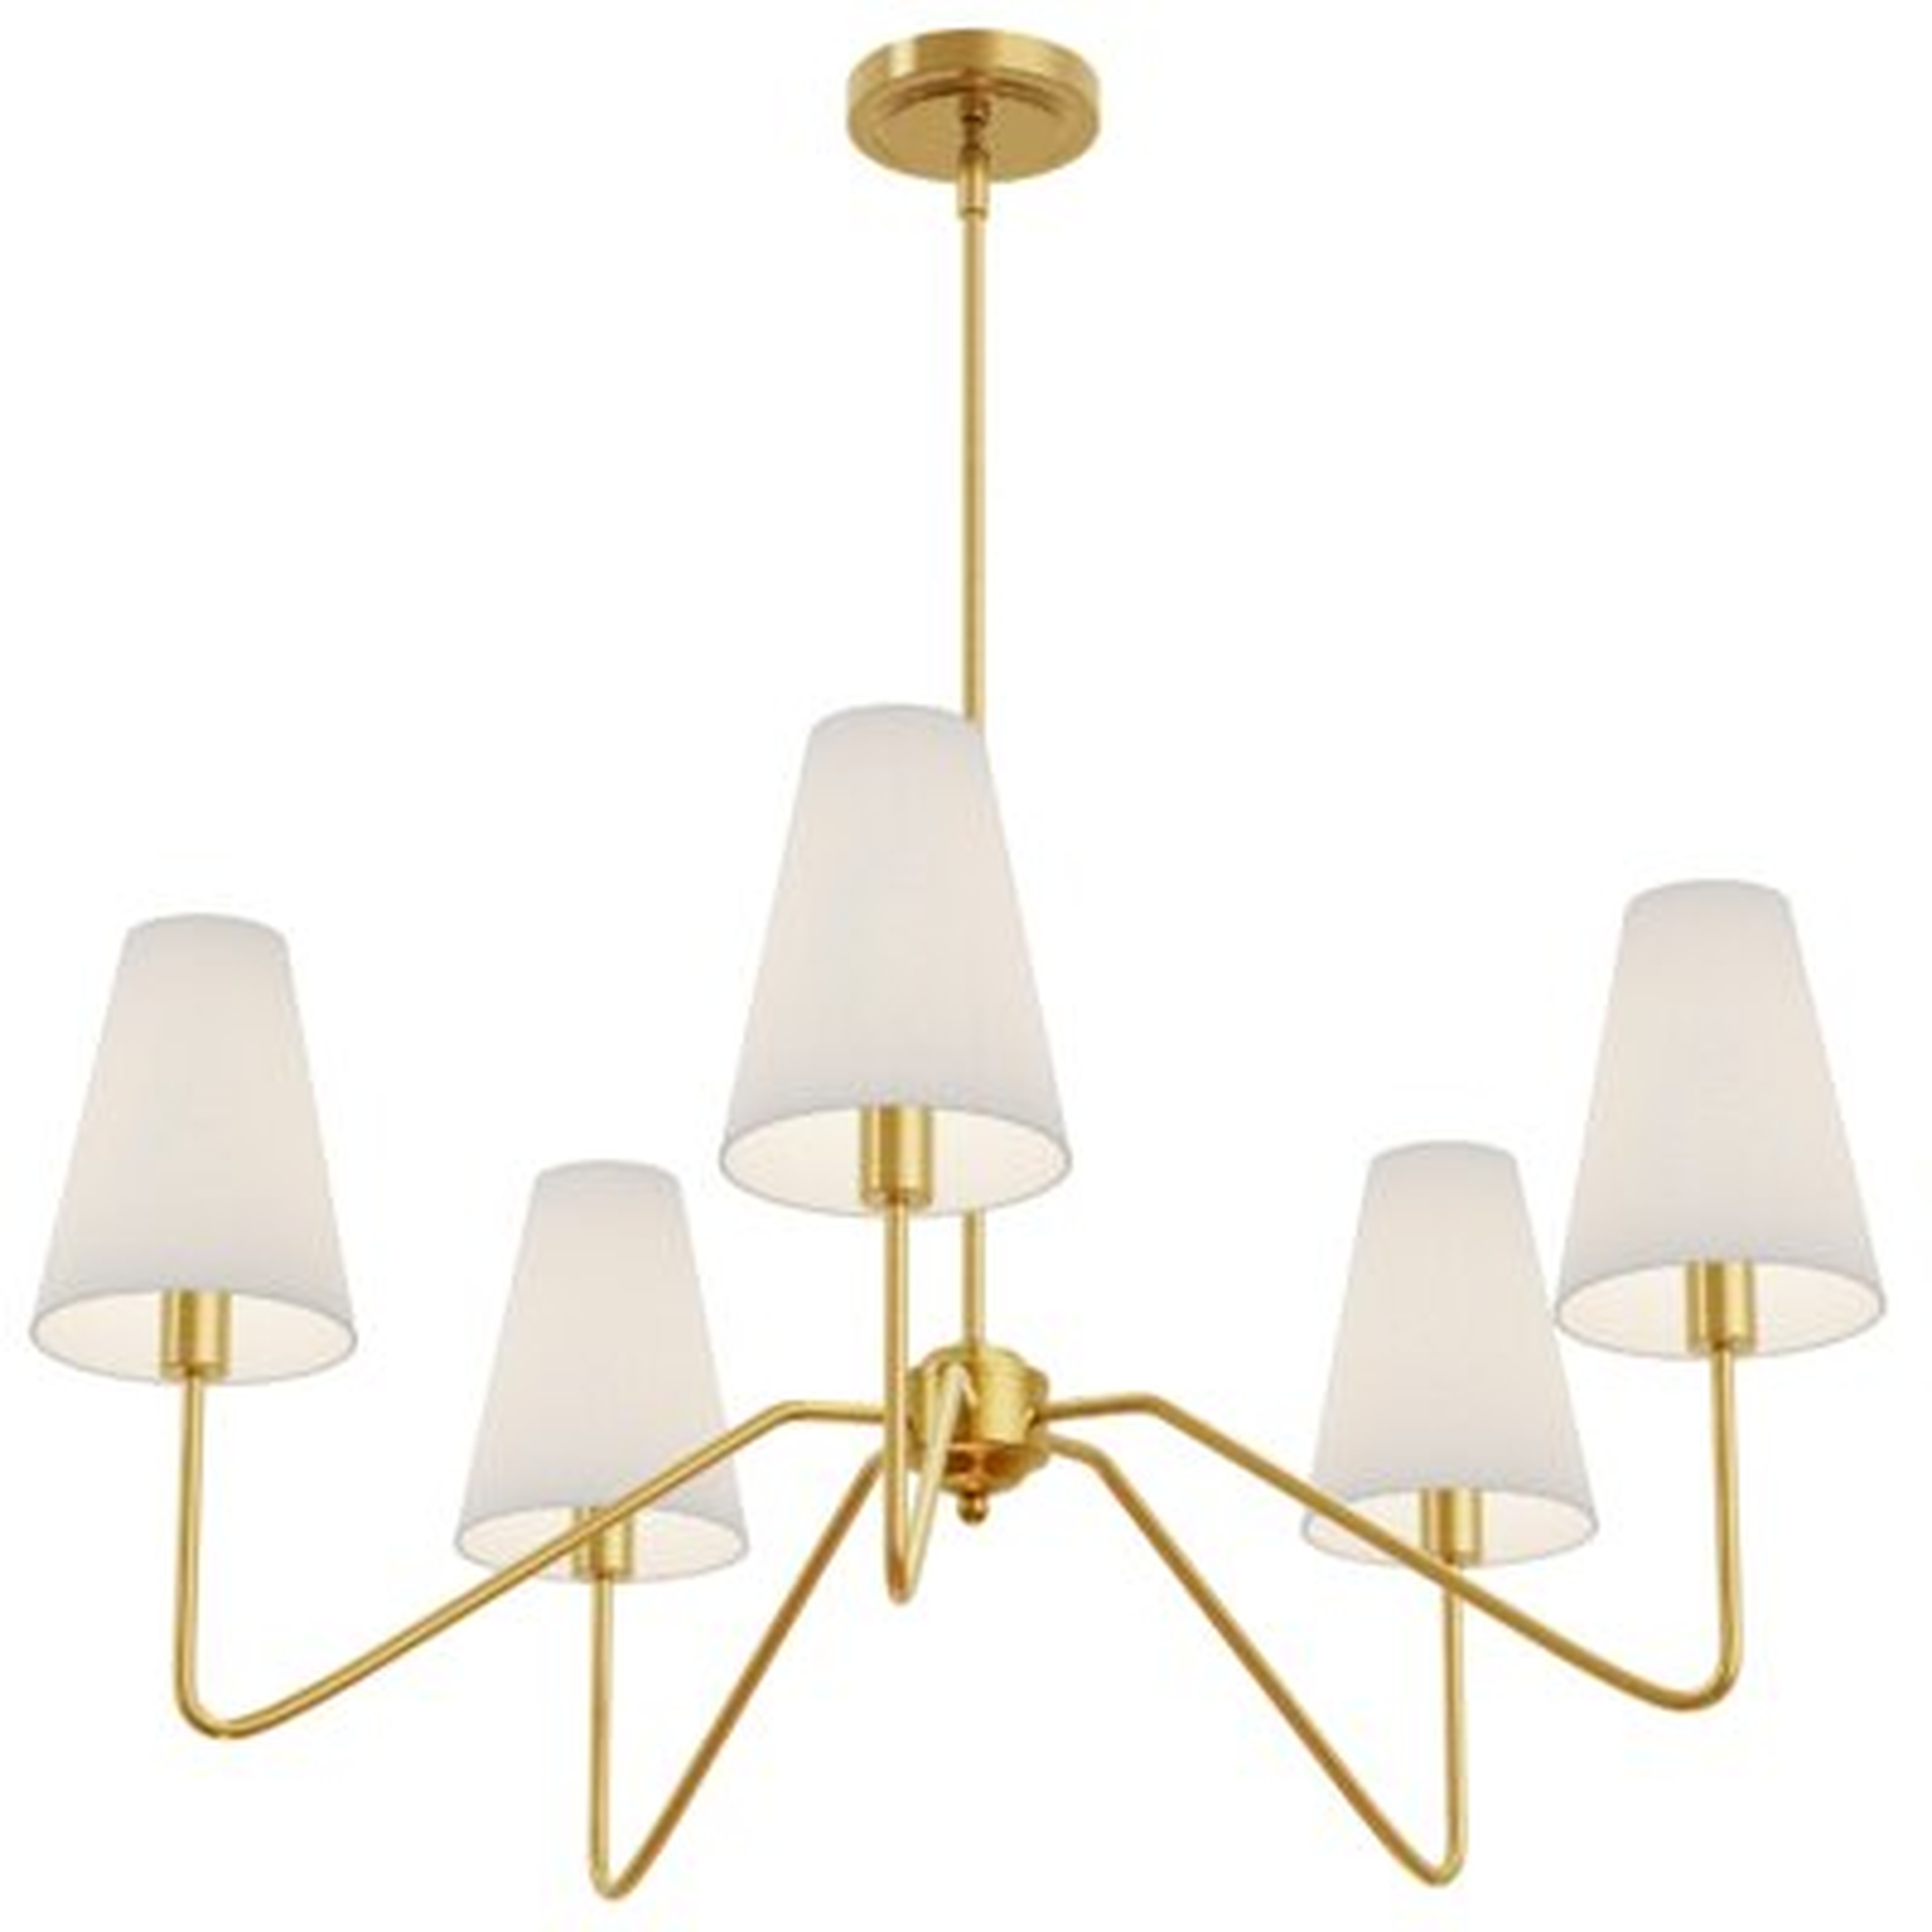 30"Dia 5-Arm Classic Chandeleirs Polished Gold With White Linen Shades,200W - Wayfair